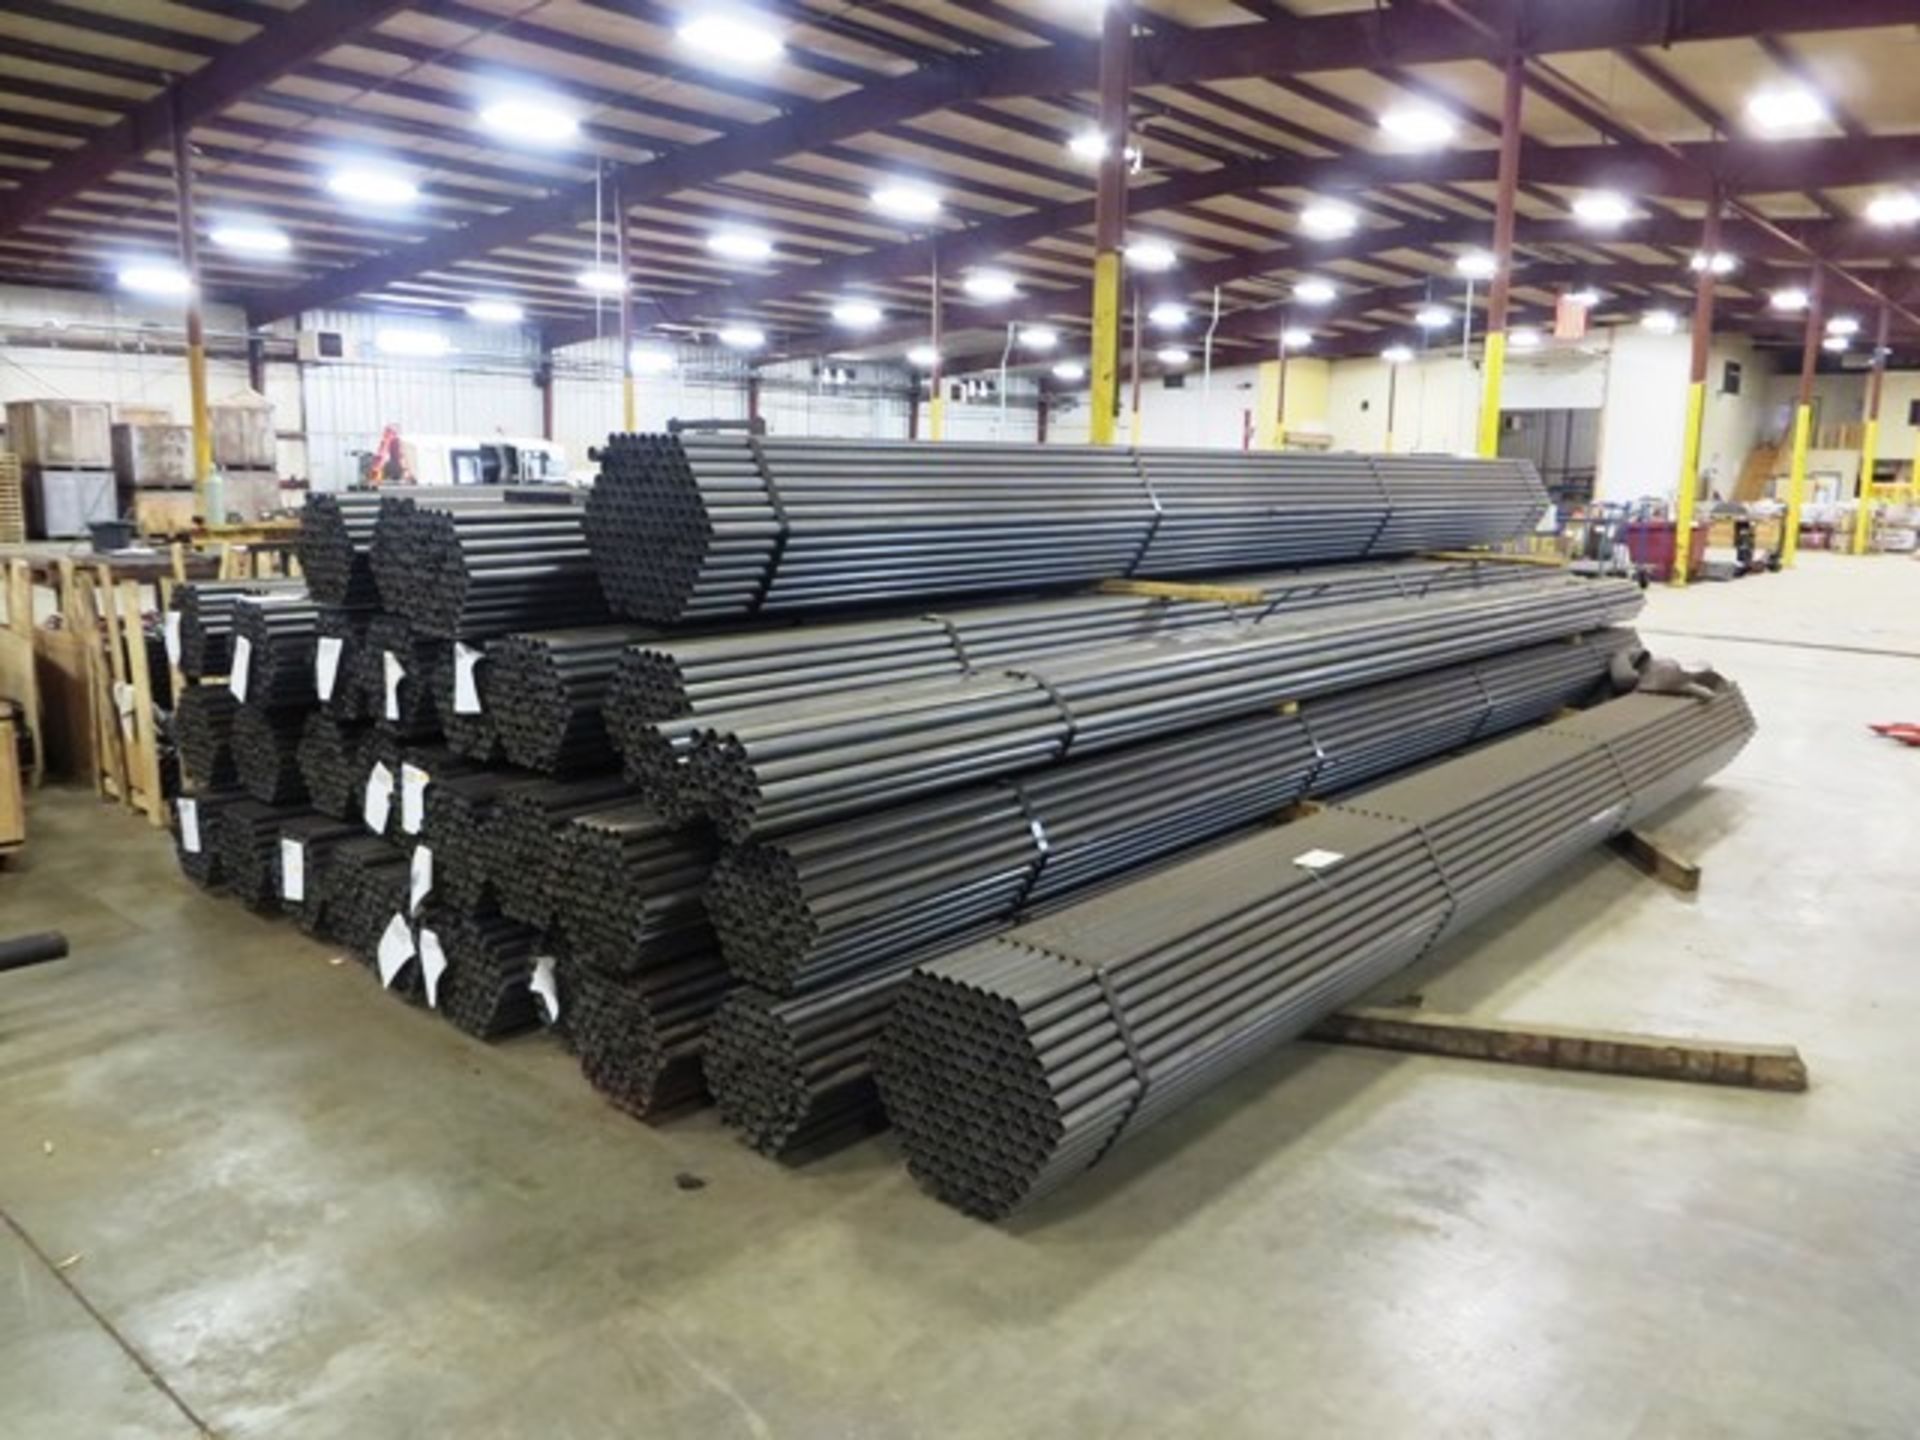 1-5/8" x Approx 34,000' of Steel Piping, & 2" x 0.65" Tube, Approx 1200'